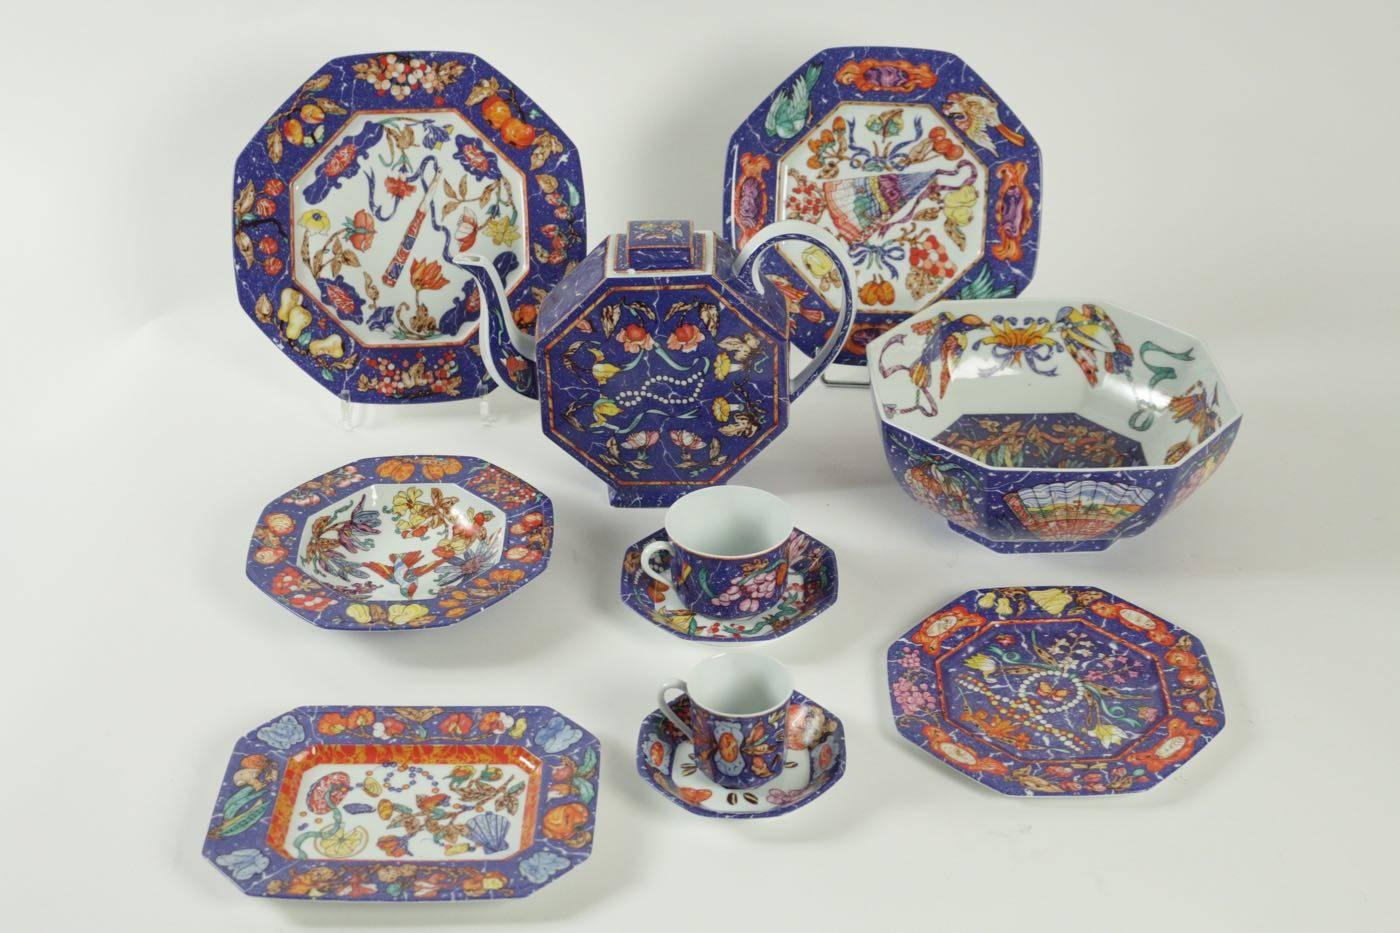 This set comprising
Eight large dishes D 28 Cm
Eight soup plates D 20 cm
Eight plates D 25 cm
Eight dessert plates D 21 cm
Two dishes 22 cm x 18 cm
One large salad bowl diameter 24 cm, high 10 cm

One coffee maker,
Eight cups of coffee and